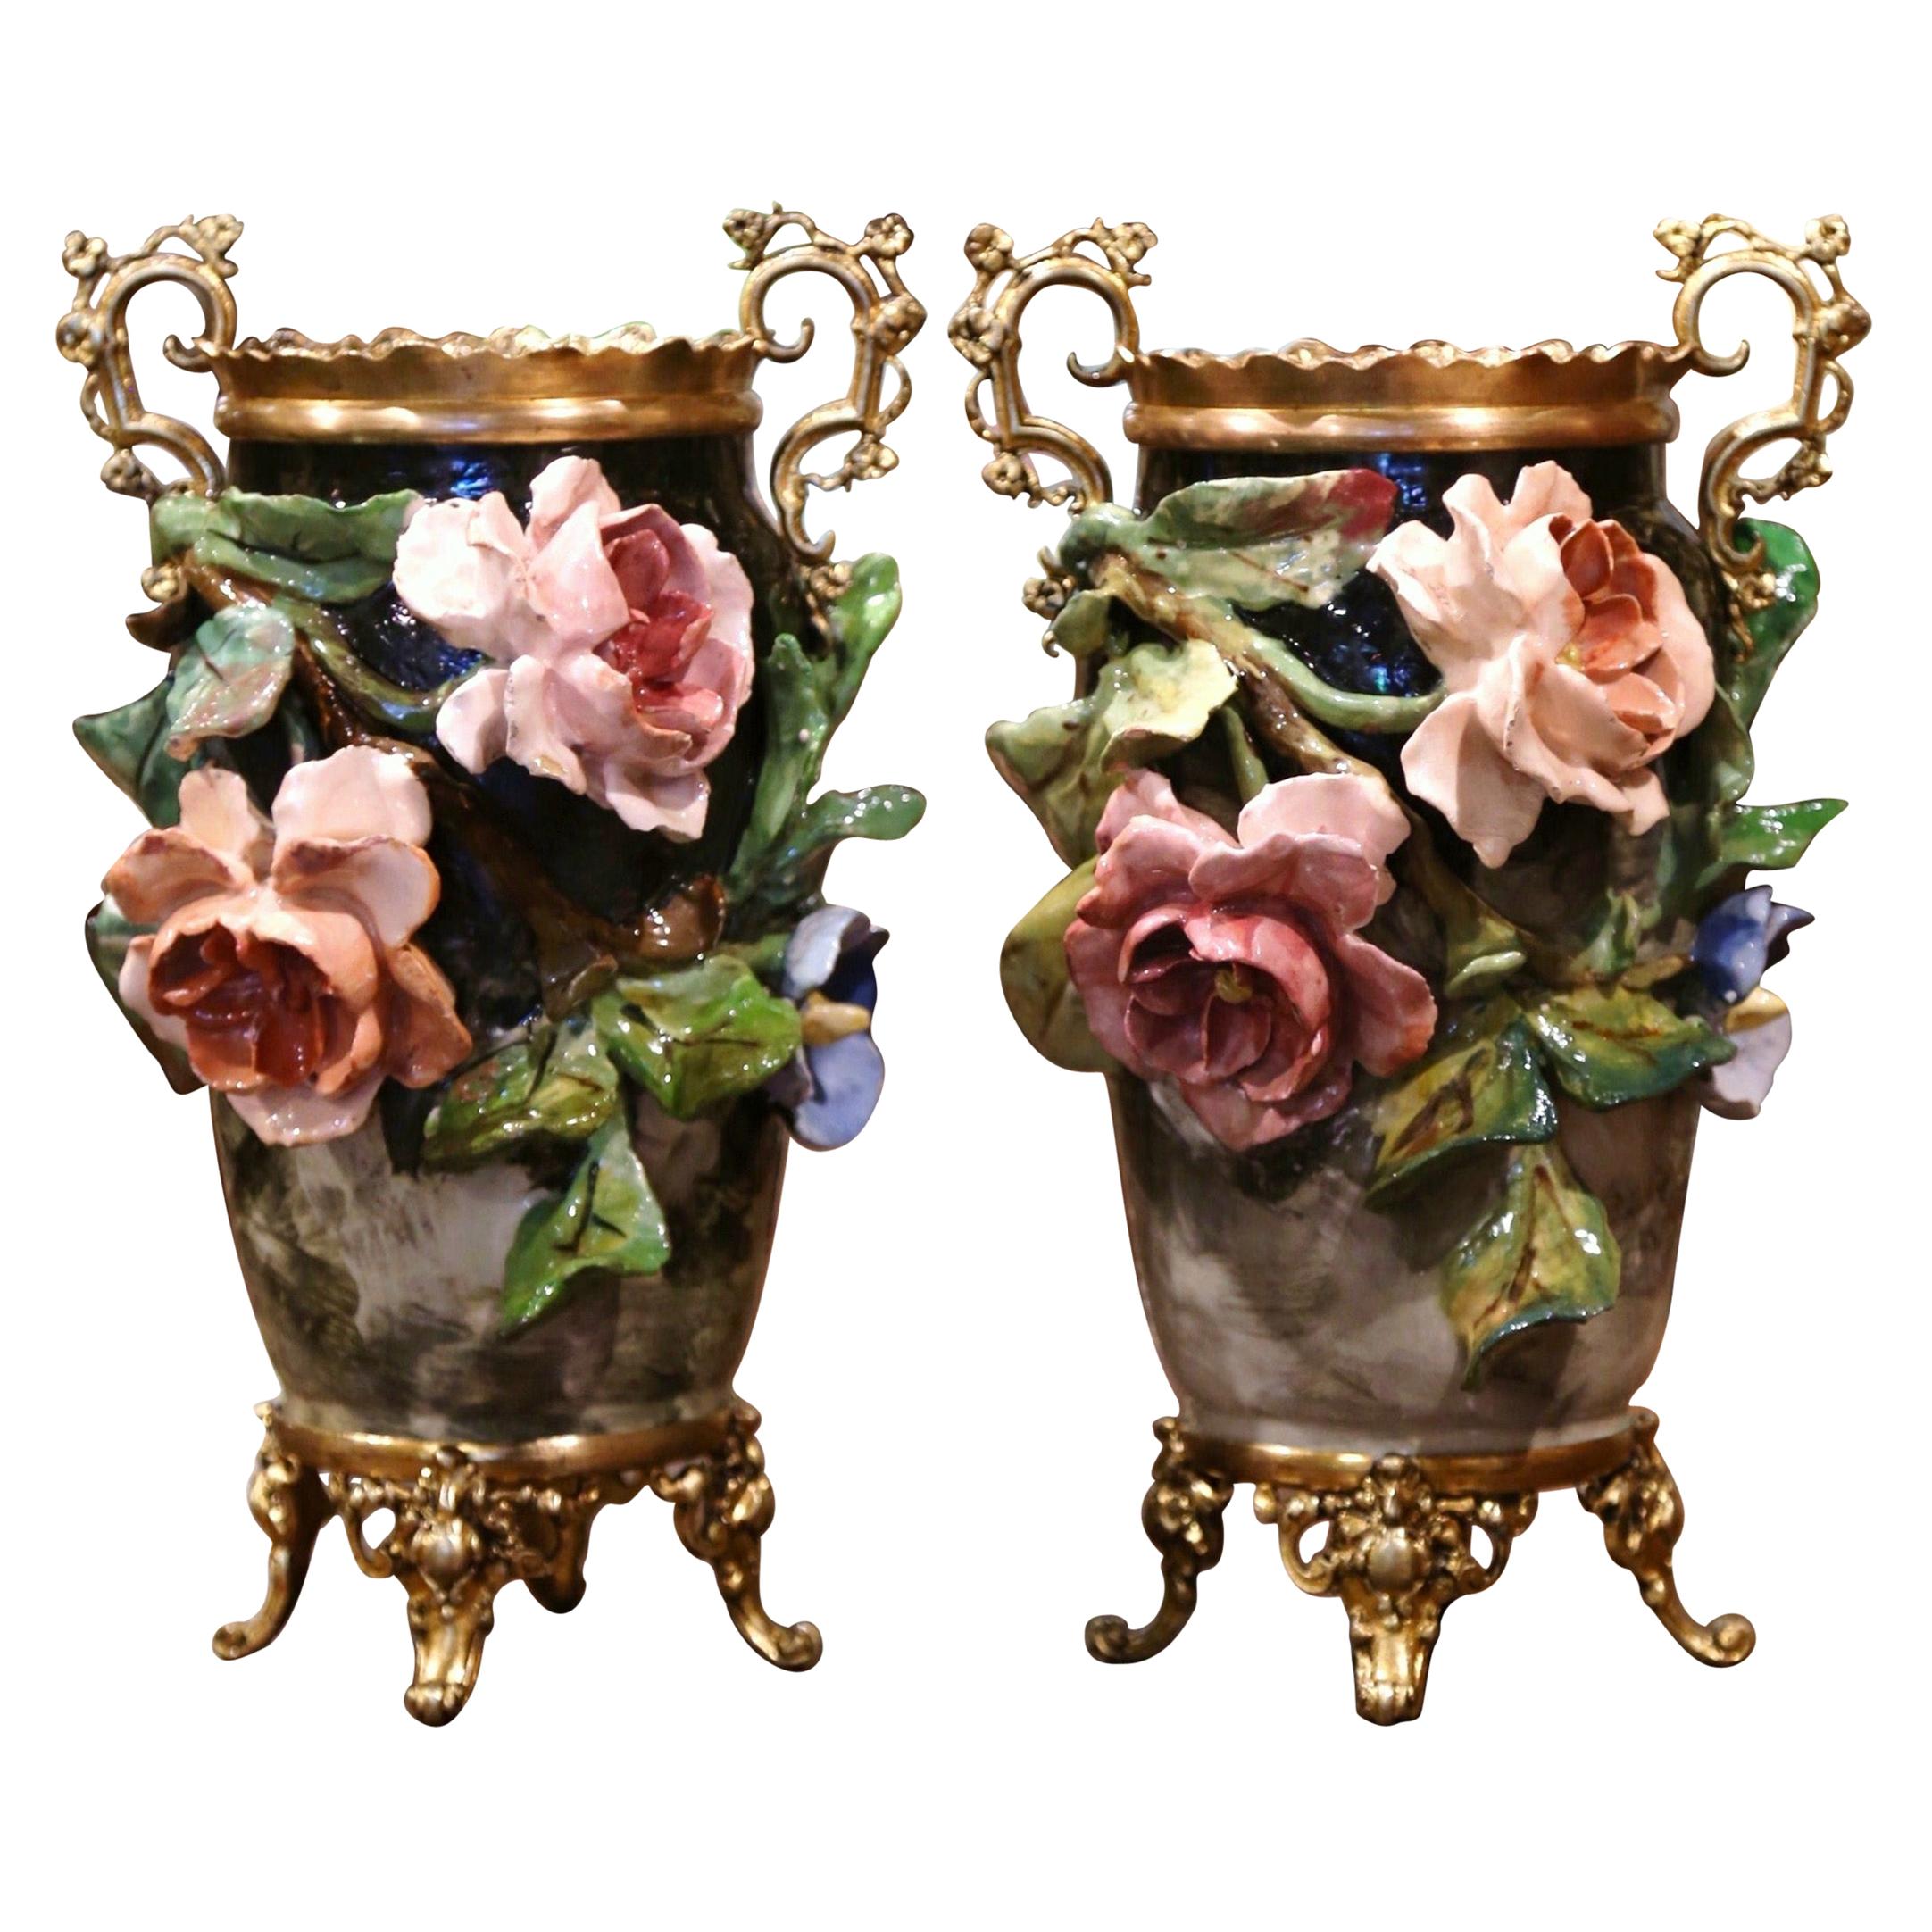 Pair of 19th Century French Faience and Brass Barbotine Vases with Floral Decor